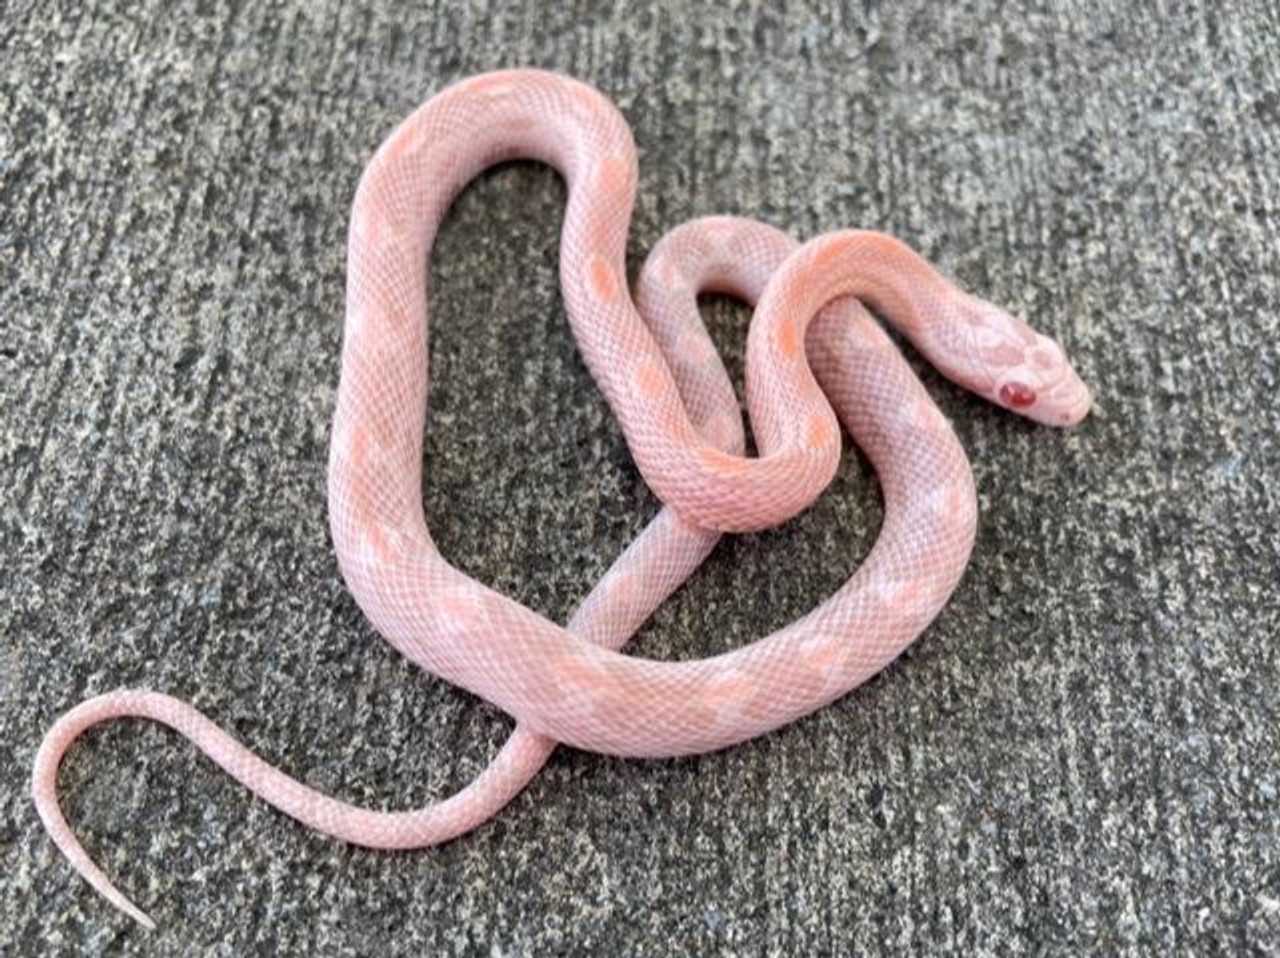 Easy Care Tips for Your Pink Snake